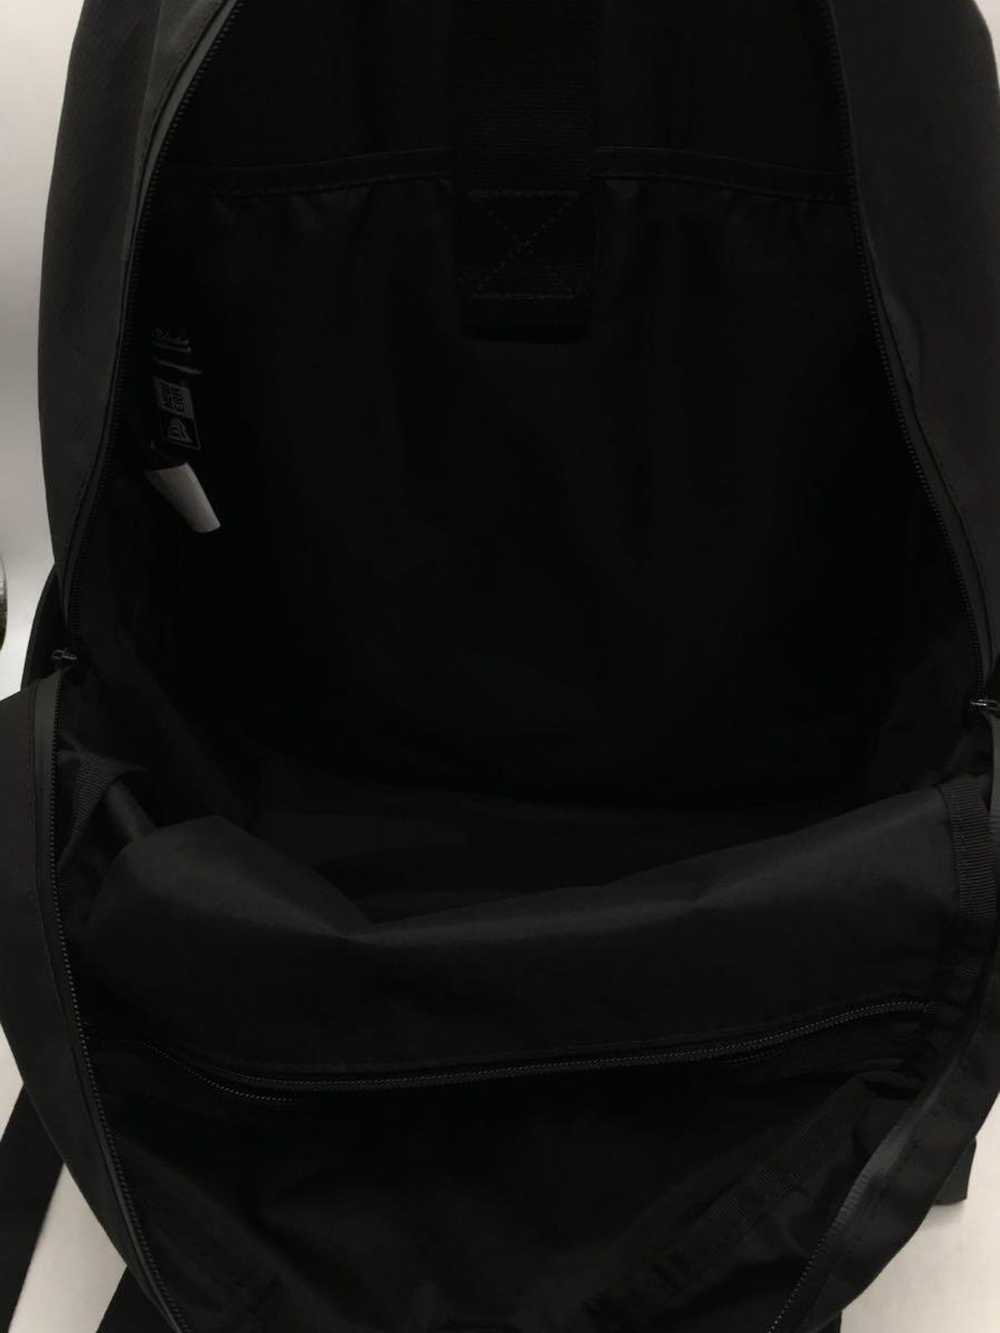 Undercover Undercover Maniac Nylon Backpack - image 5